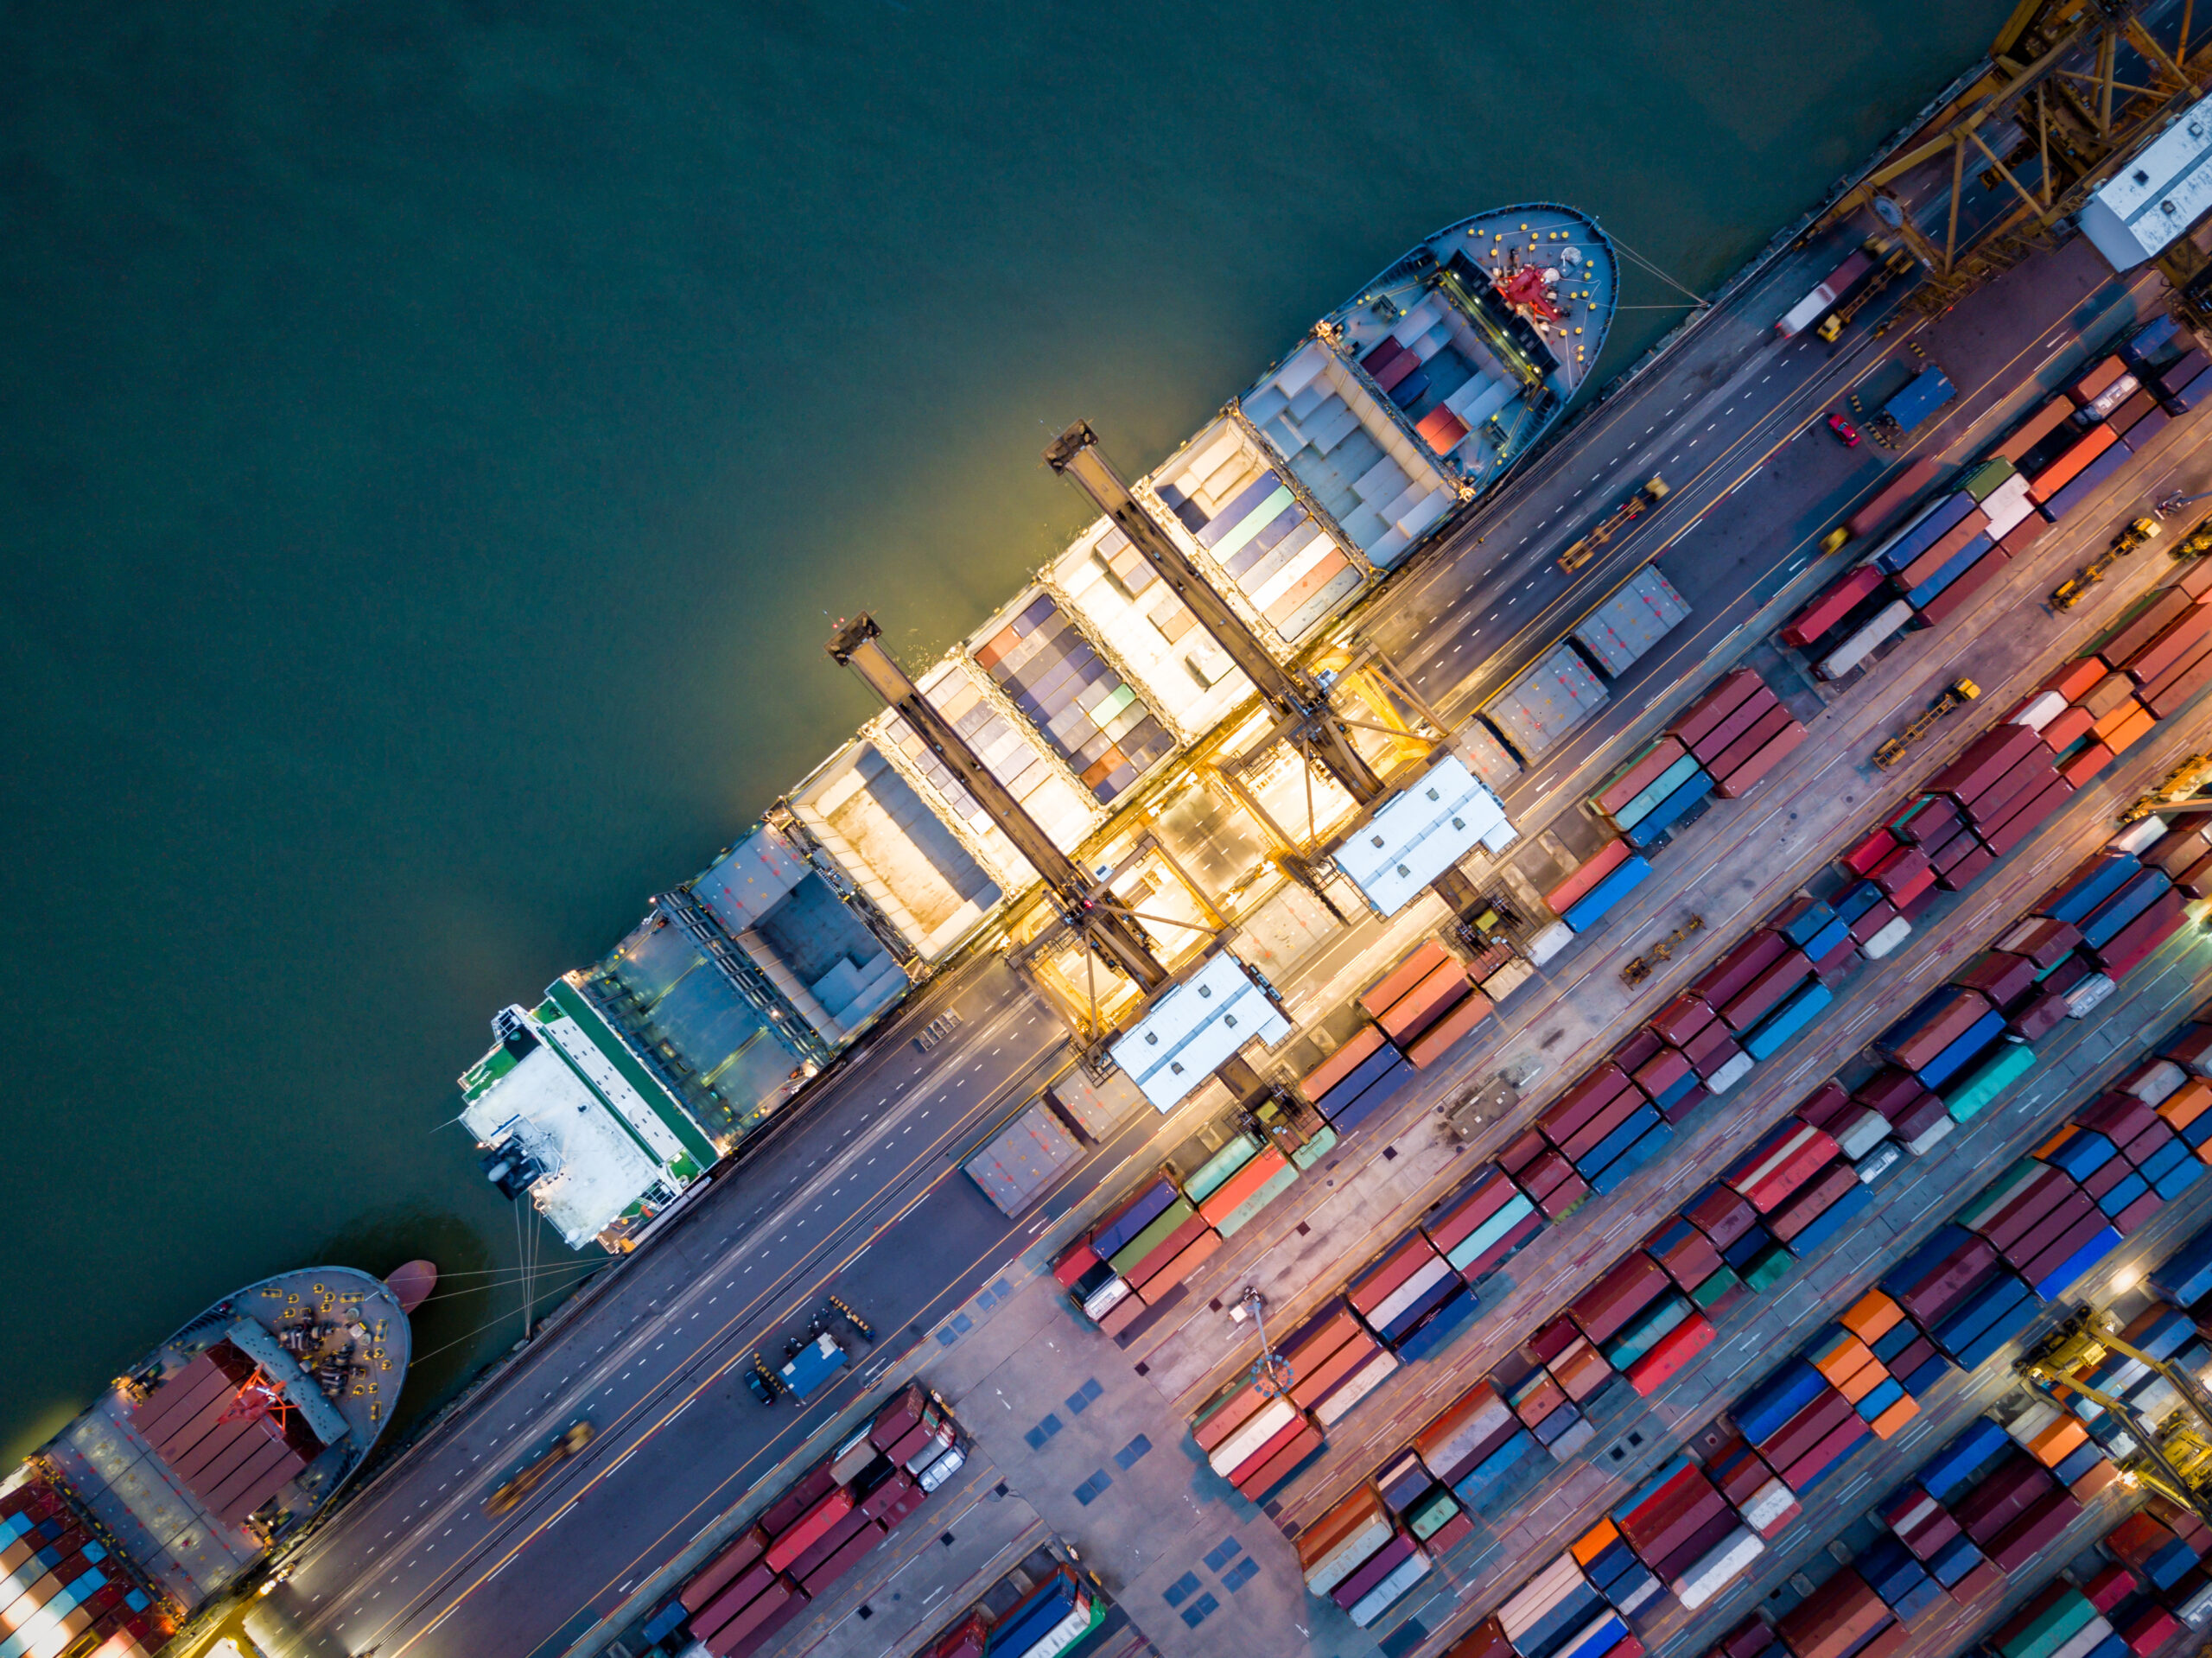 Six Key Trends Impacting Global Supply Chains in 2022